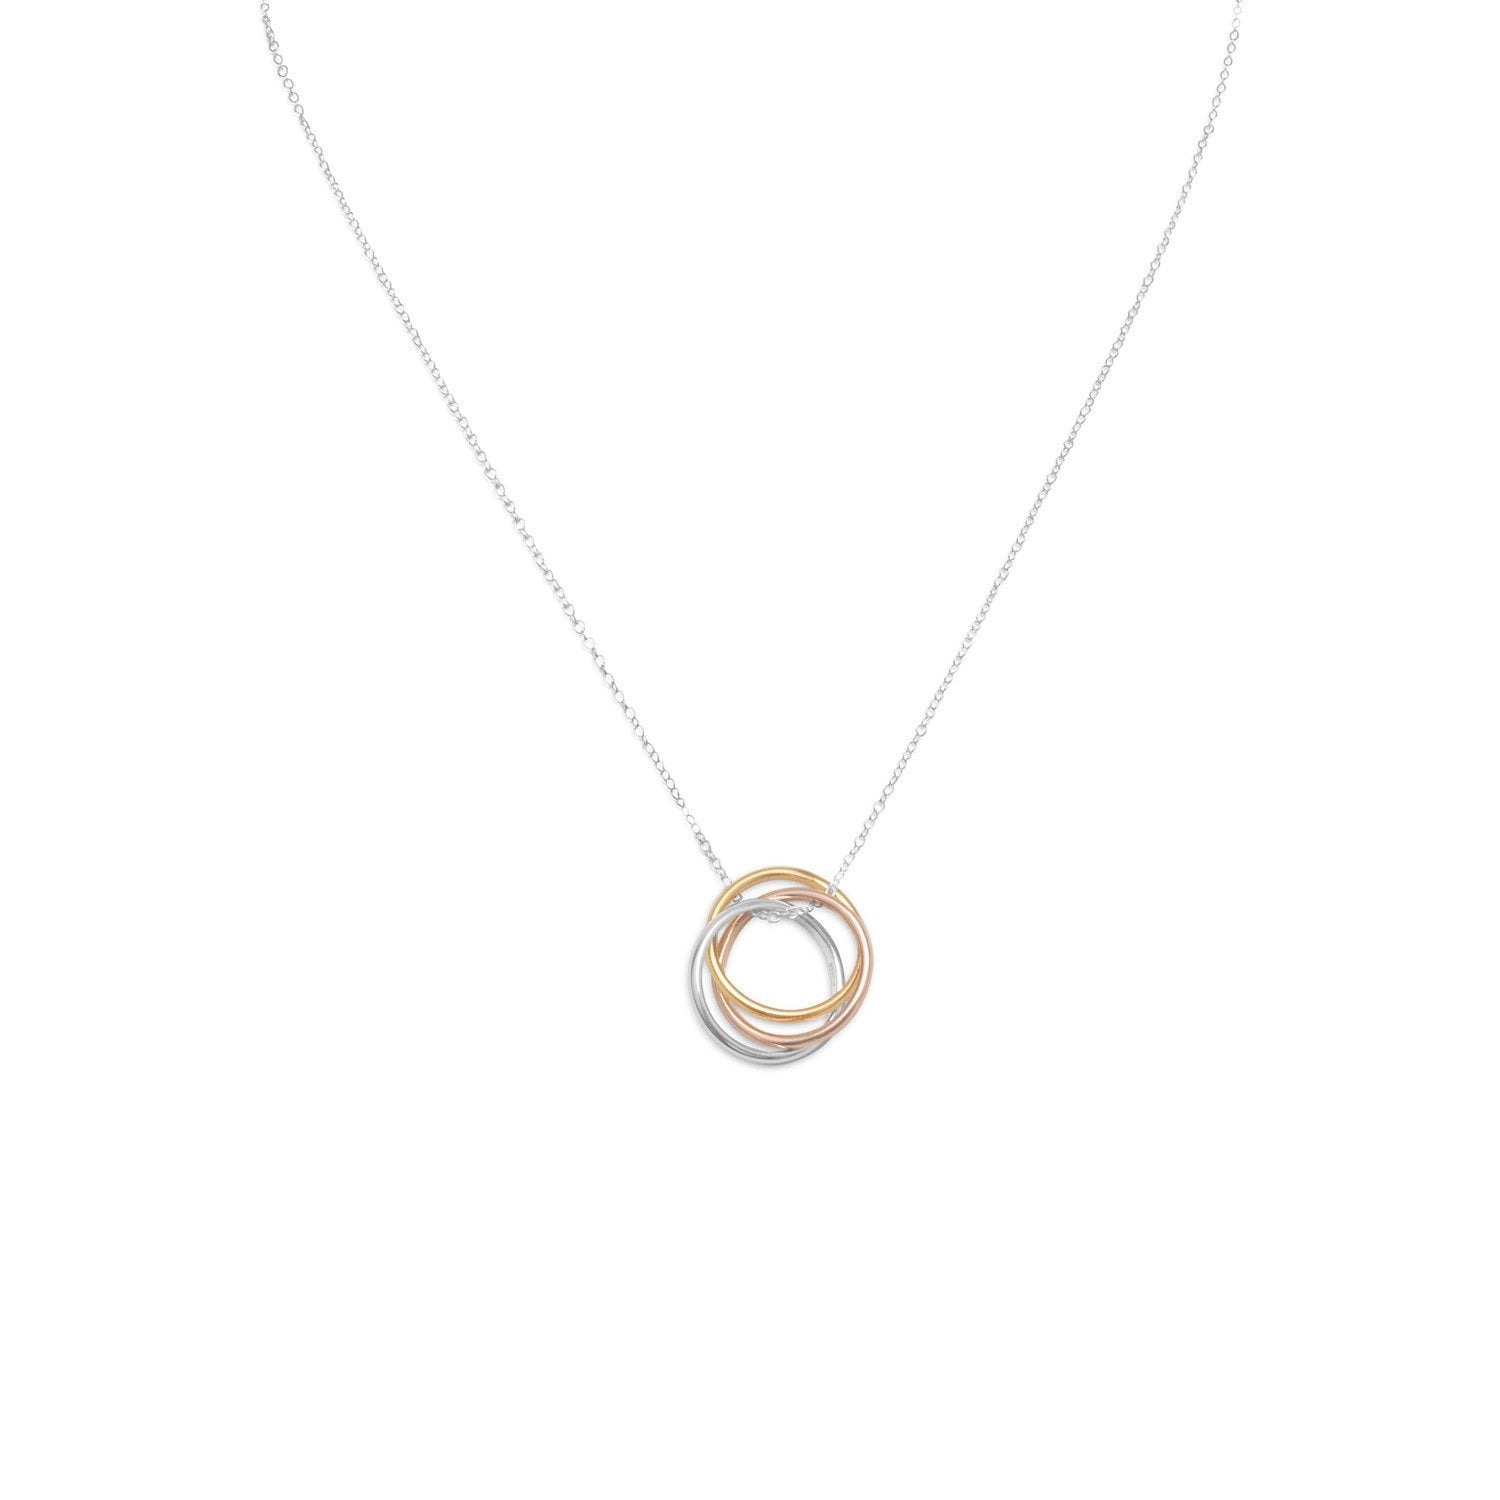 16" Necklace with Tri Tone Rings